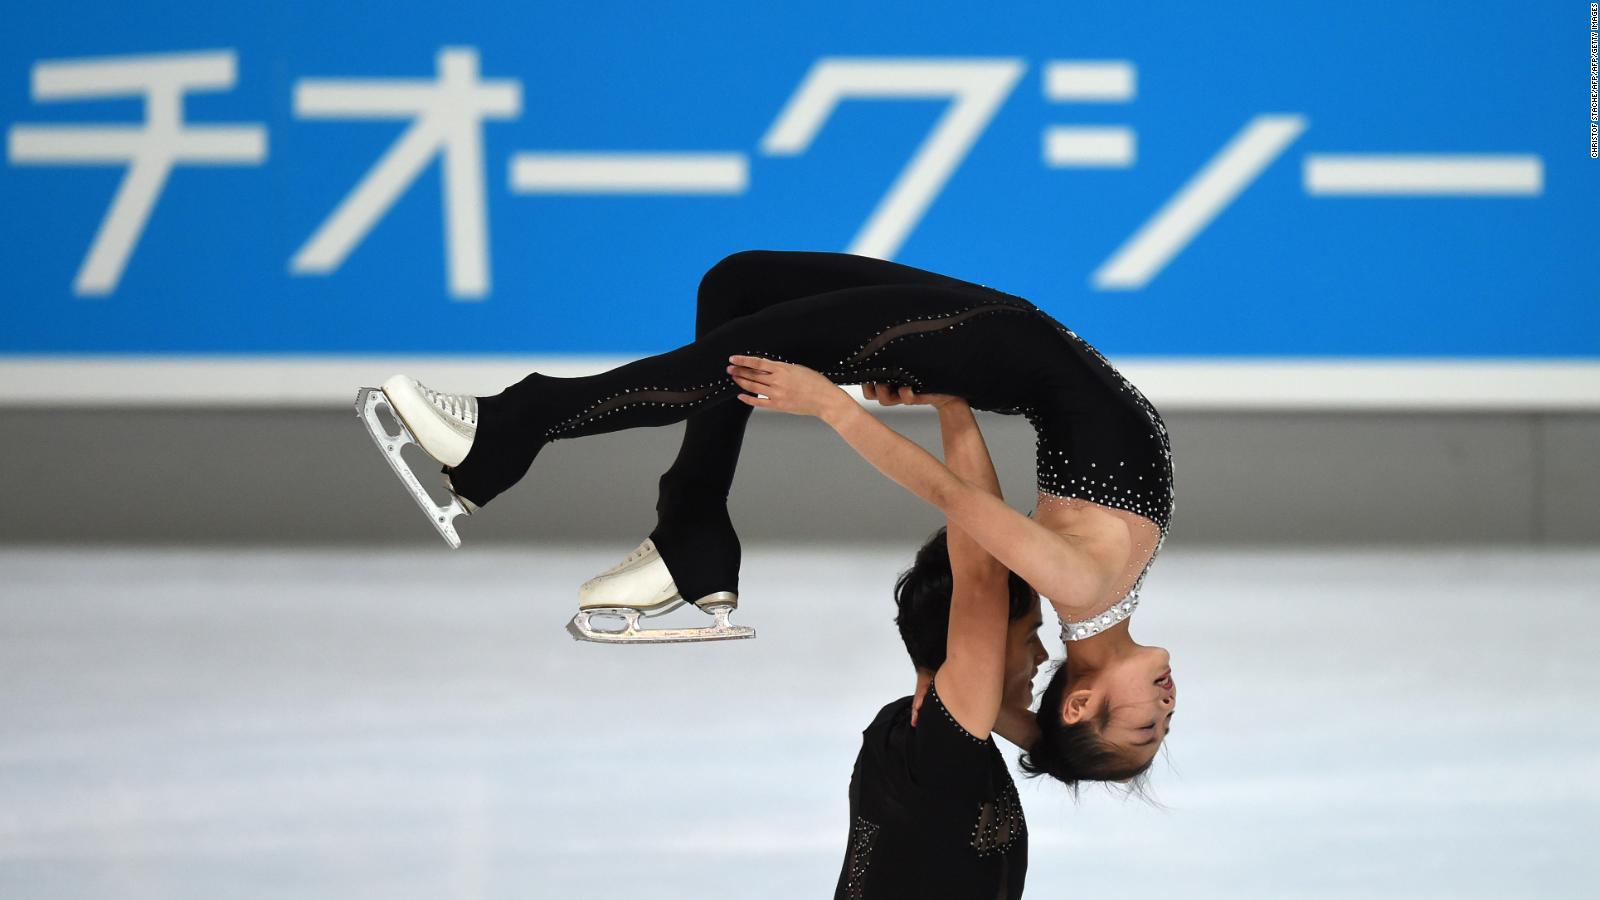 North Korean figure skaters revel in starring role on Olympic ice